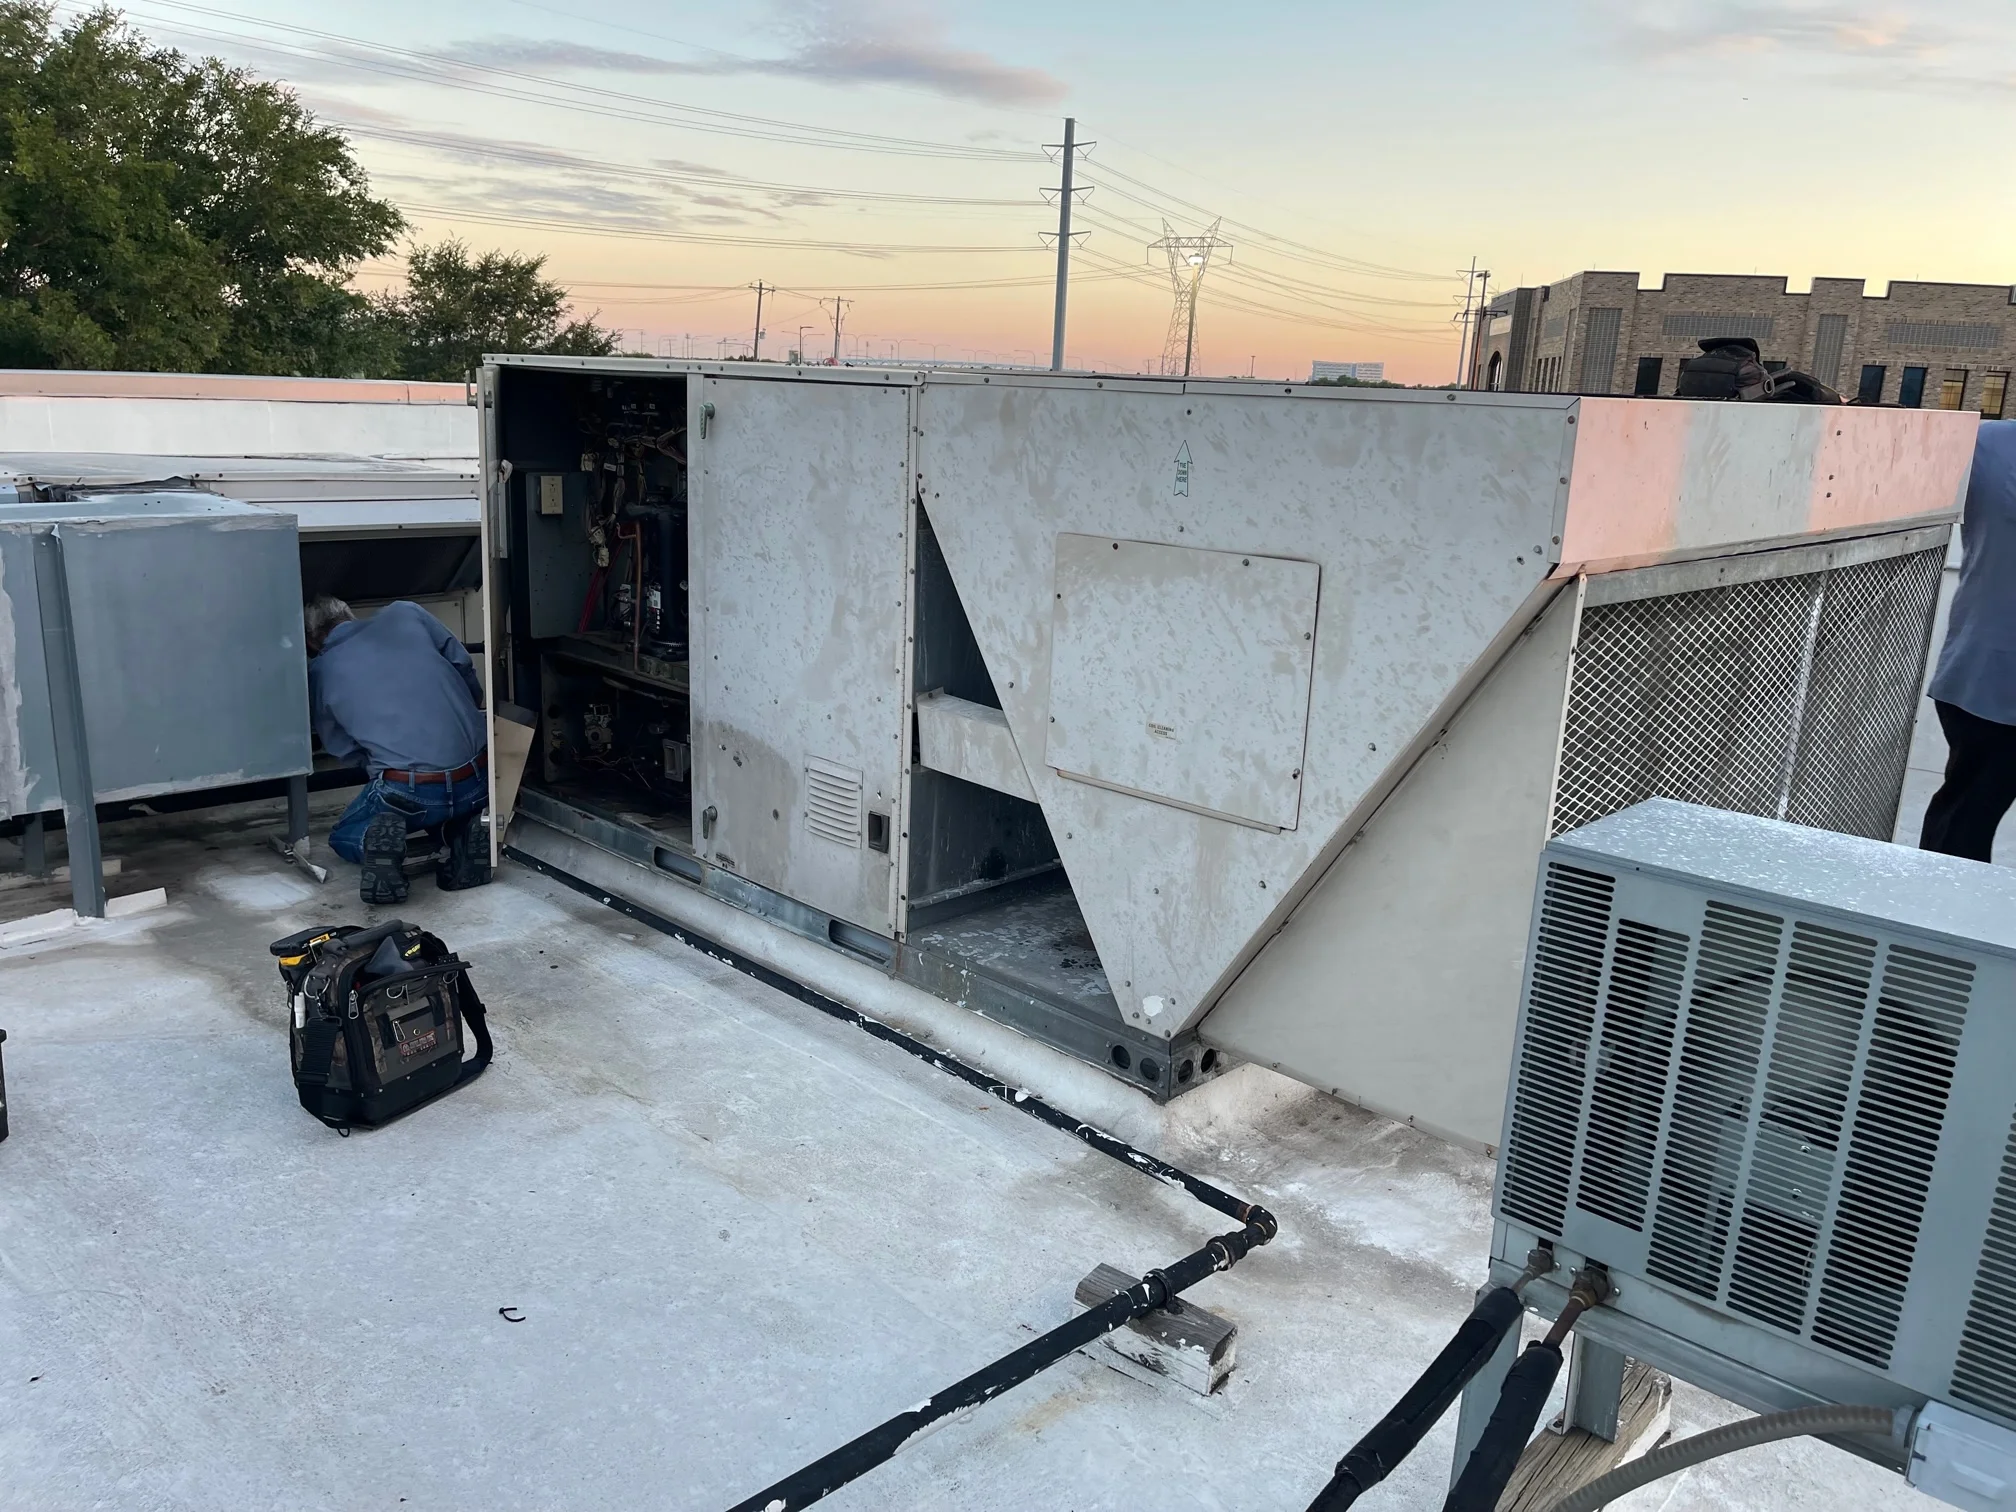 Our Service Manager removing the gas line connection in preparation for the replacement of this Lennox commercial rooftop gas package unit in Frisco, Texas